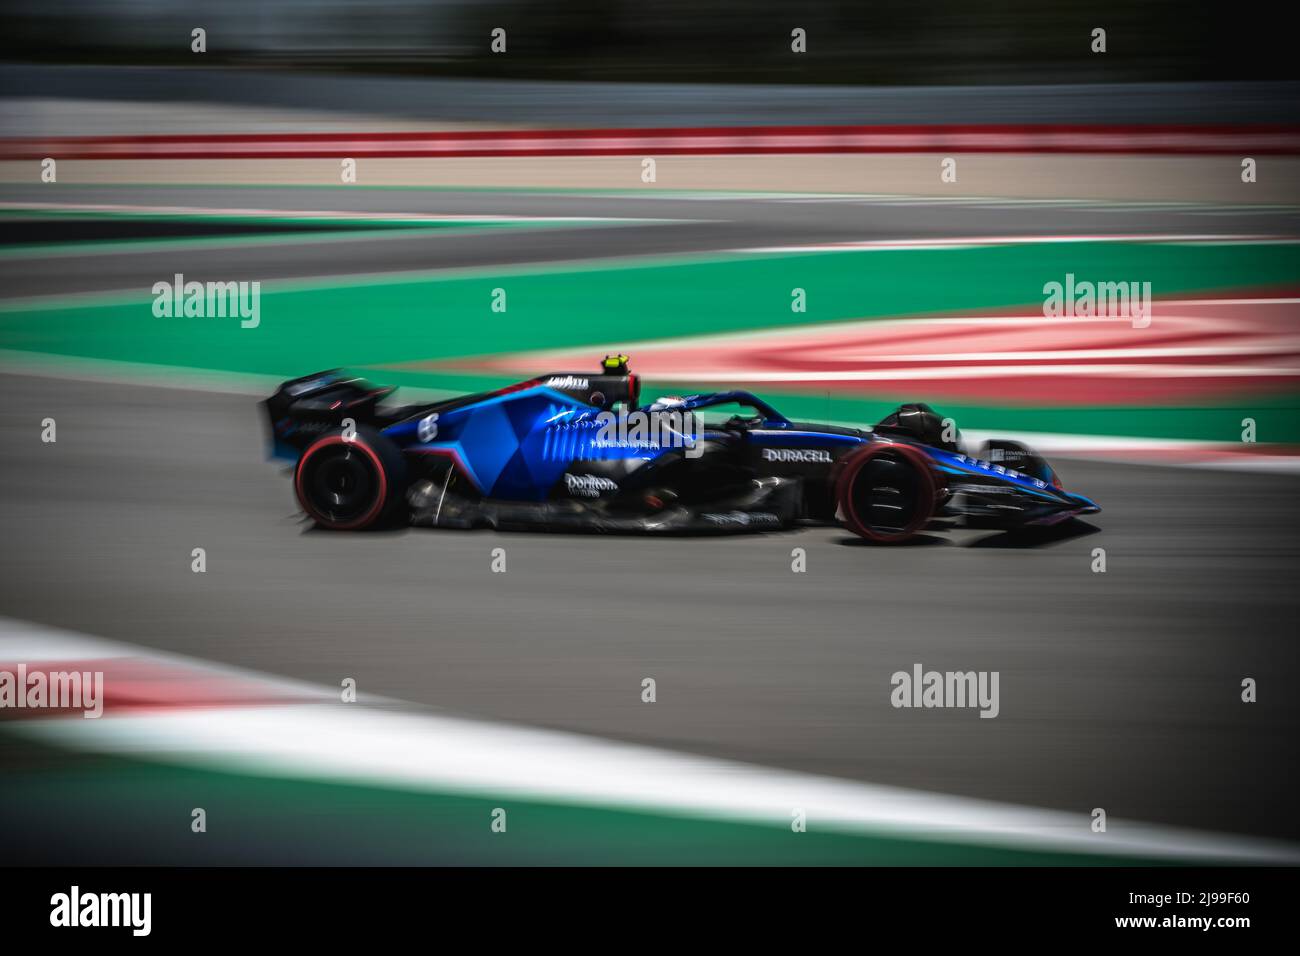 Barcelona, Spain. 21st May, 2022. NICHOLAS LATIFI (CAN) from team Williams drives in his FW44 during the third practice session of the Spanish GP at Circuit de Catalunya Credit: Matthias Oesterle/Alamy Live News Stock Photo